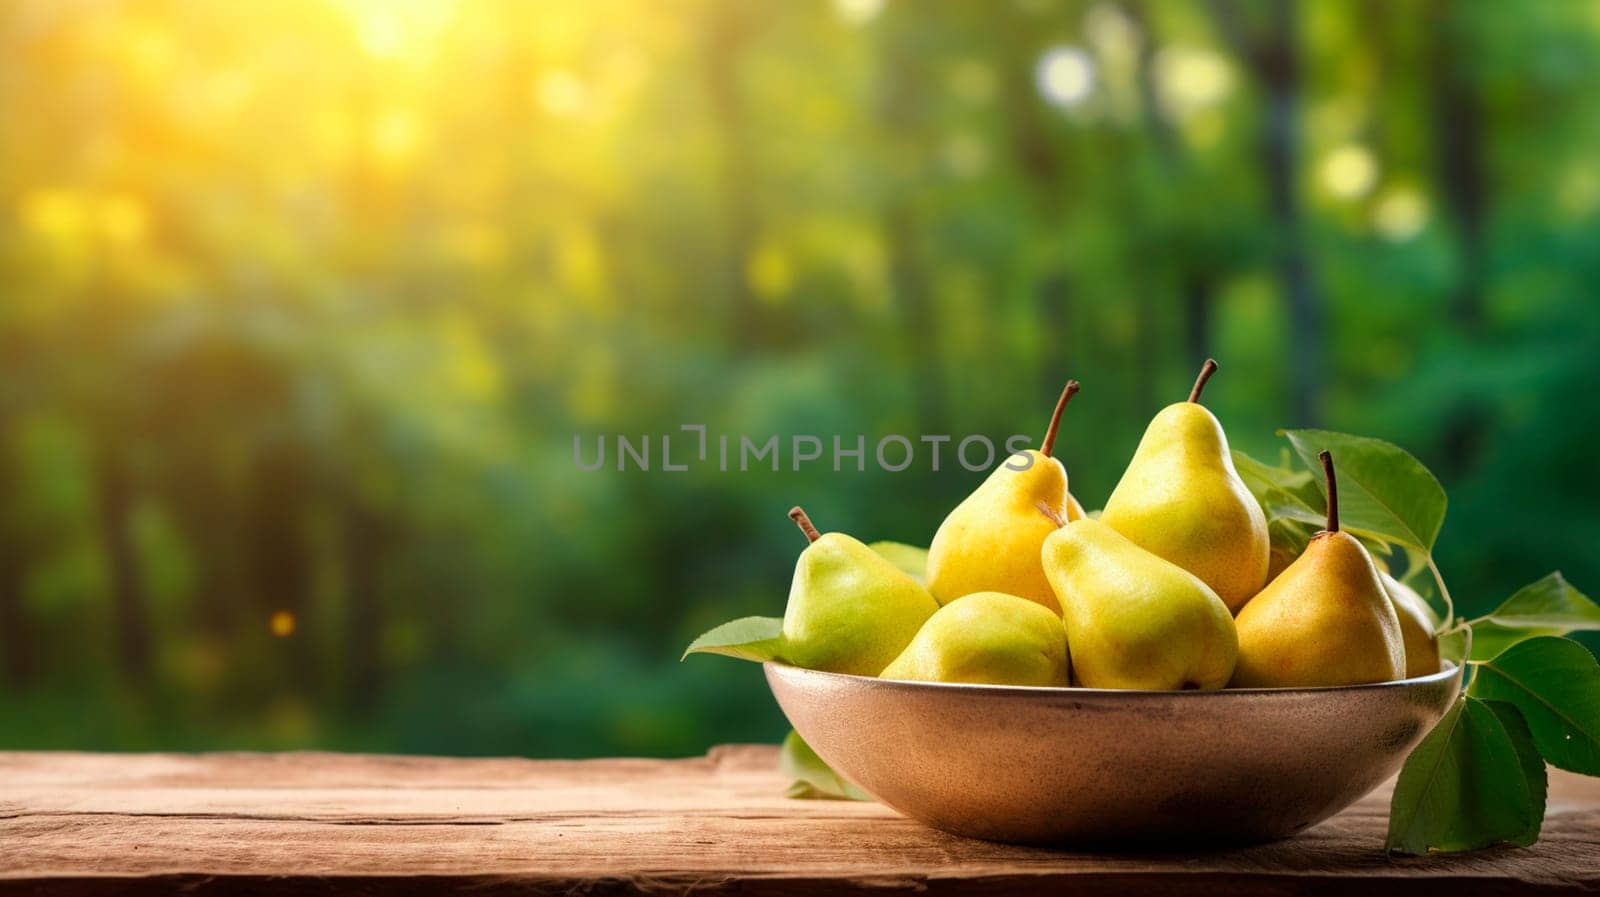 Pears in a bowl in the garden. Selective focus. Food.